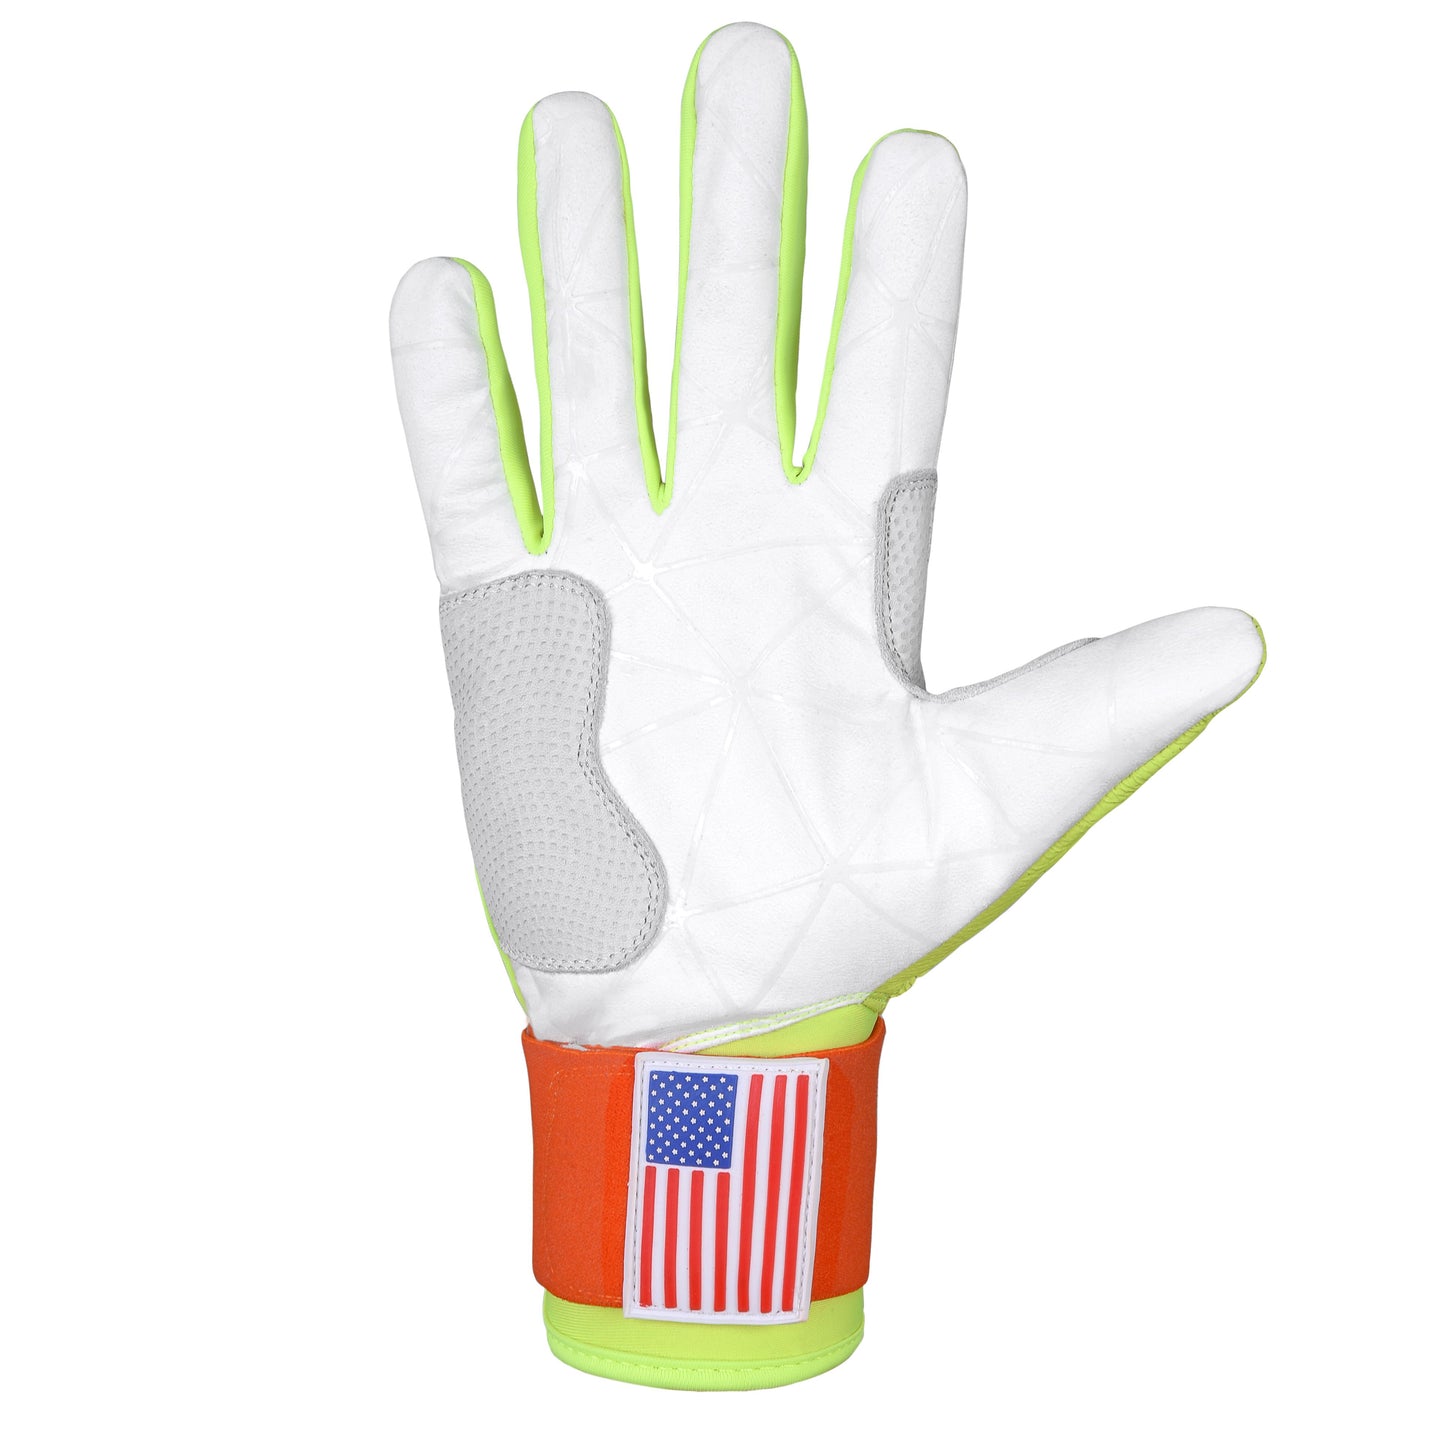 LIMITED EDITION: FIVE TOOL GEAR ELITE BATTING GLOVES - SLIMERS